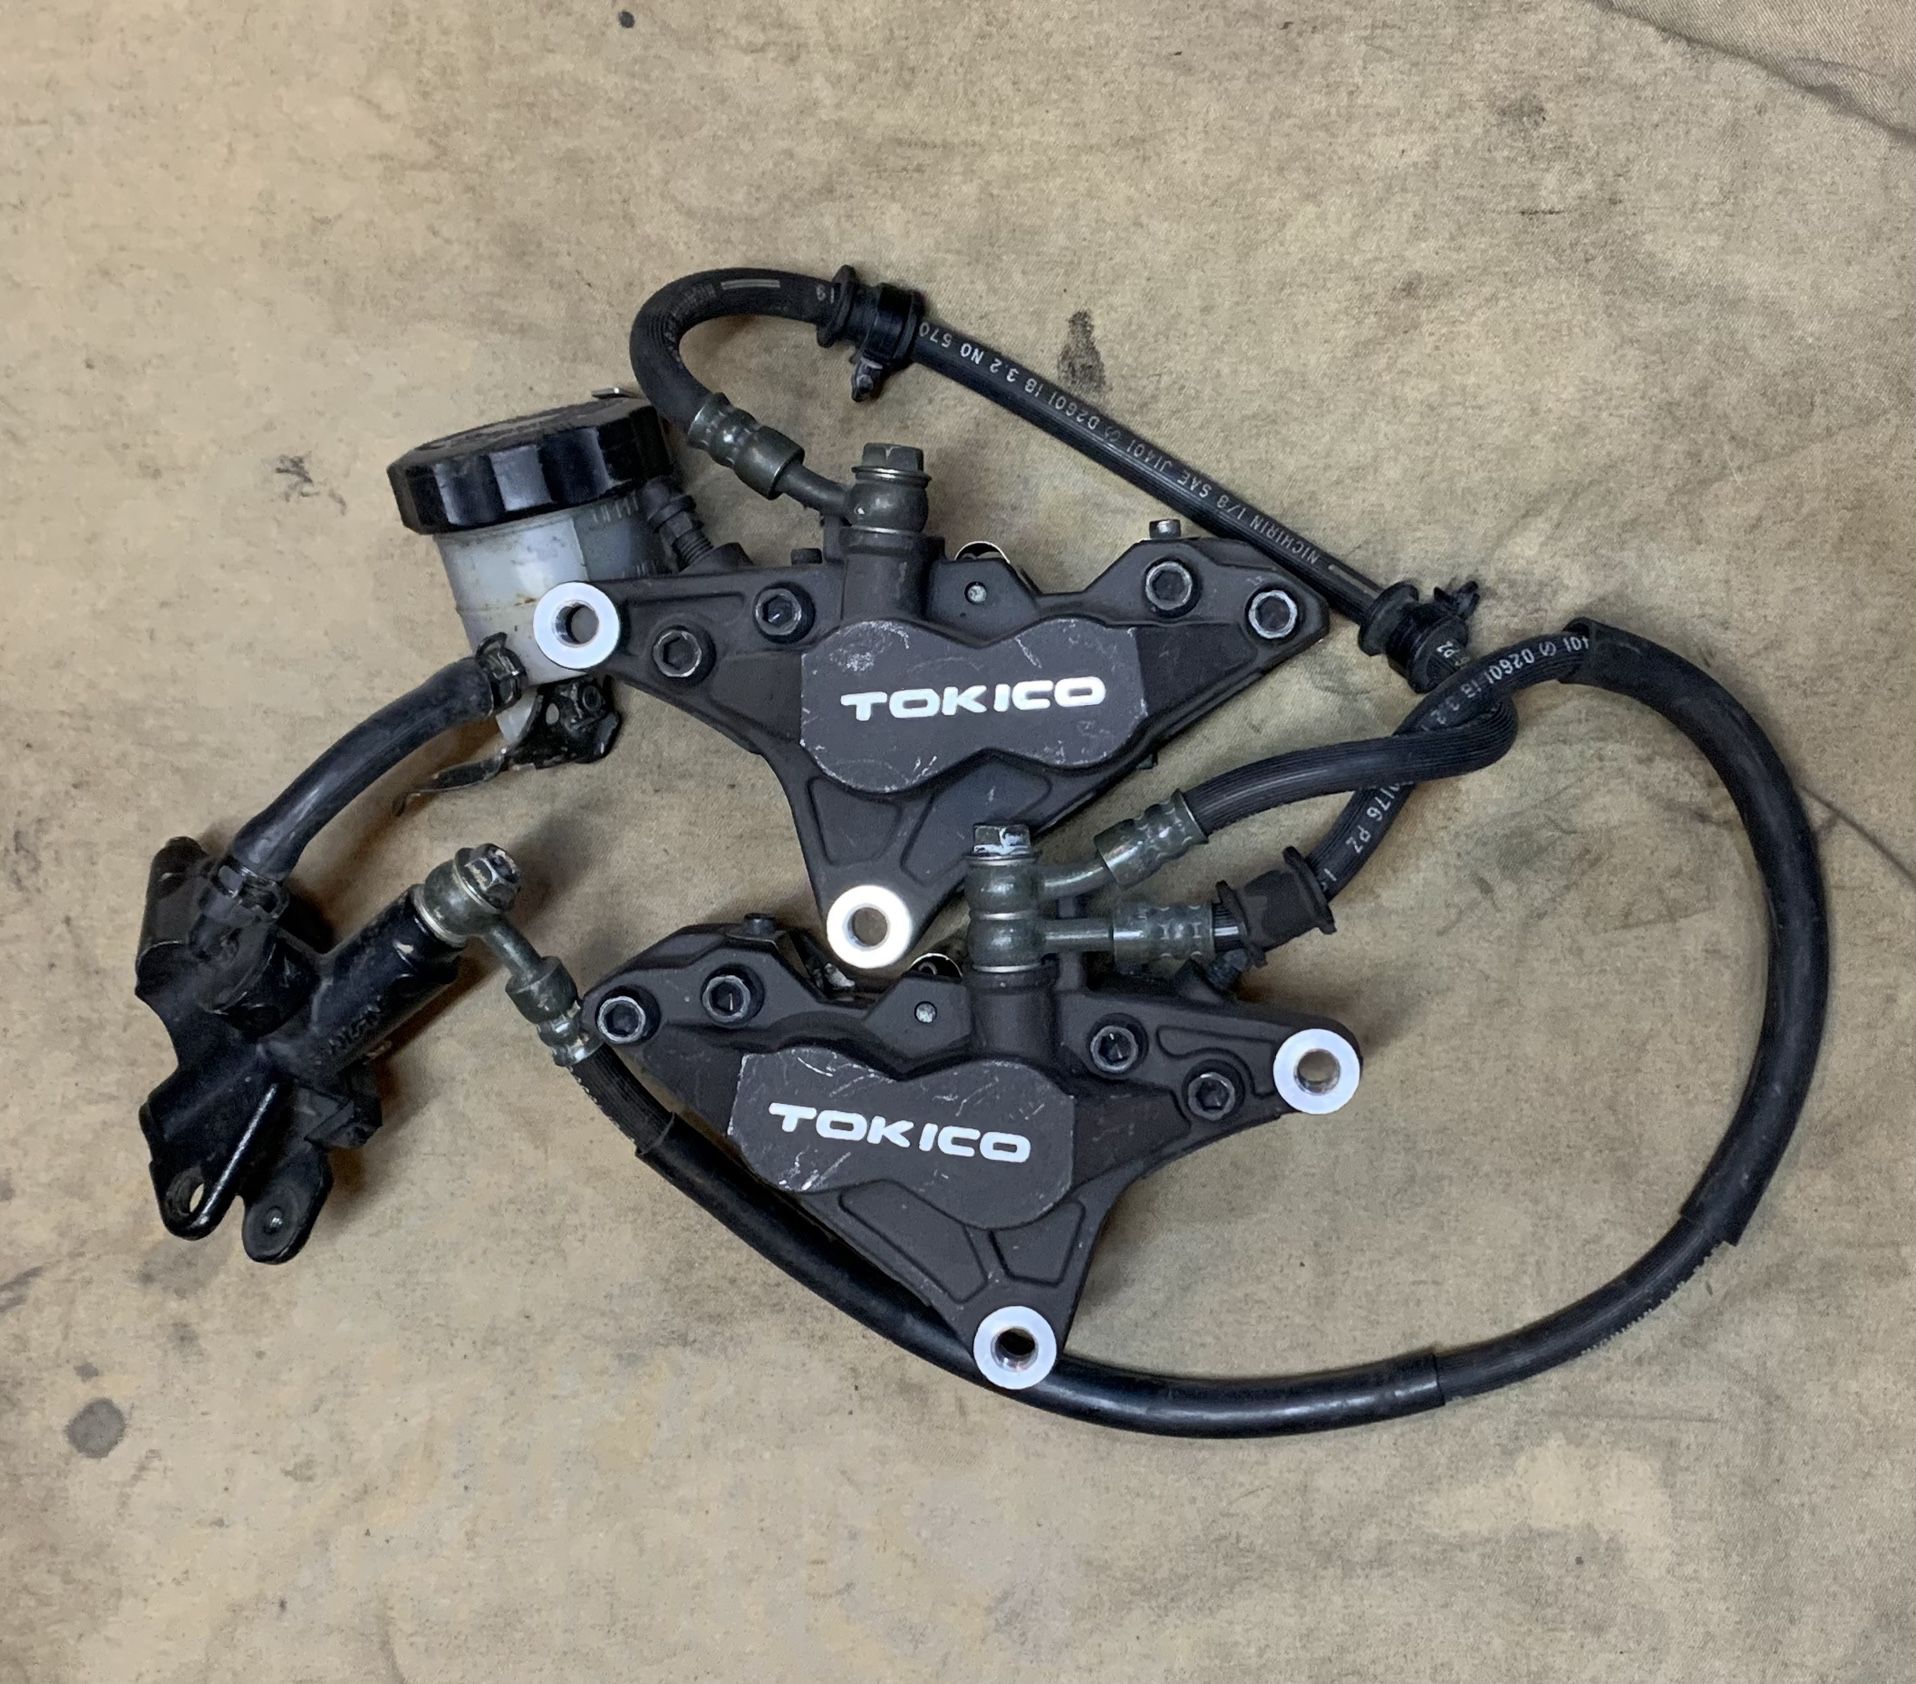 Sv650 Tokico Calipers With Radial Nissin Master 